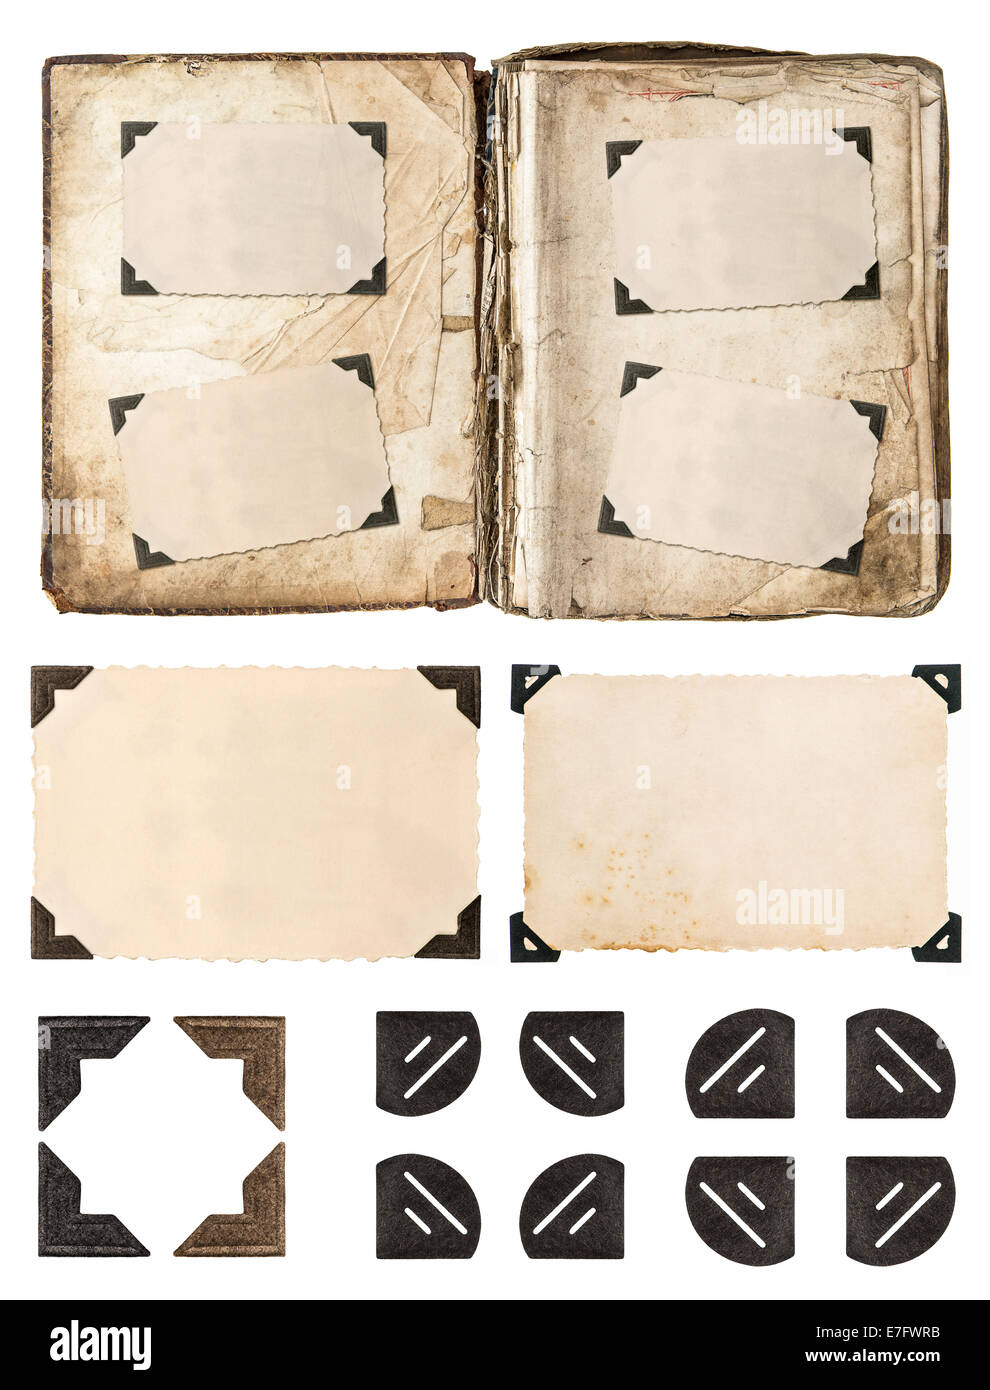 Old Photo Album Page With Frames And Corners Isolated On White Background  Stock Photo, Picture and Royalty Free Image. Image 29624608.